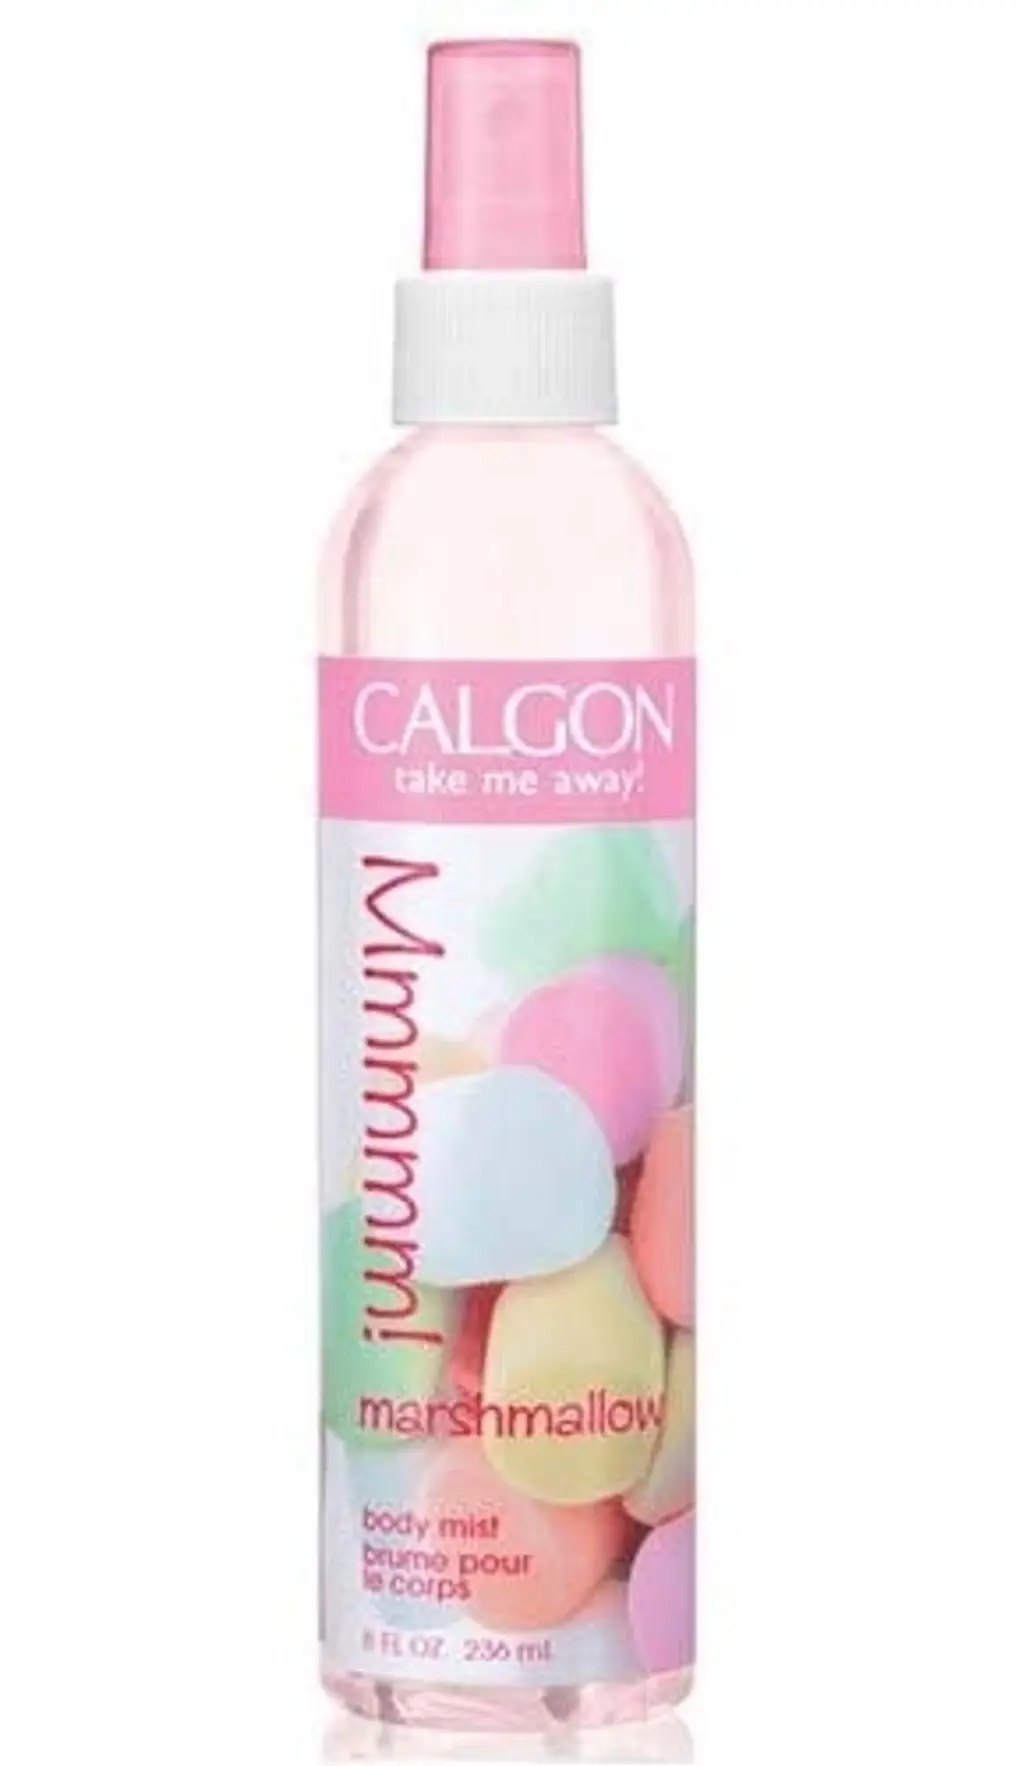 Marshmallow by Calgon